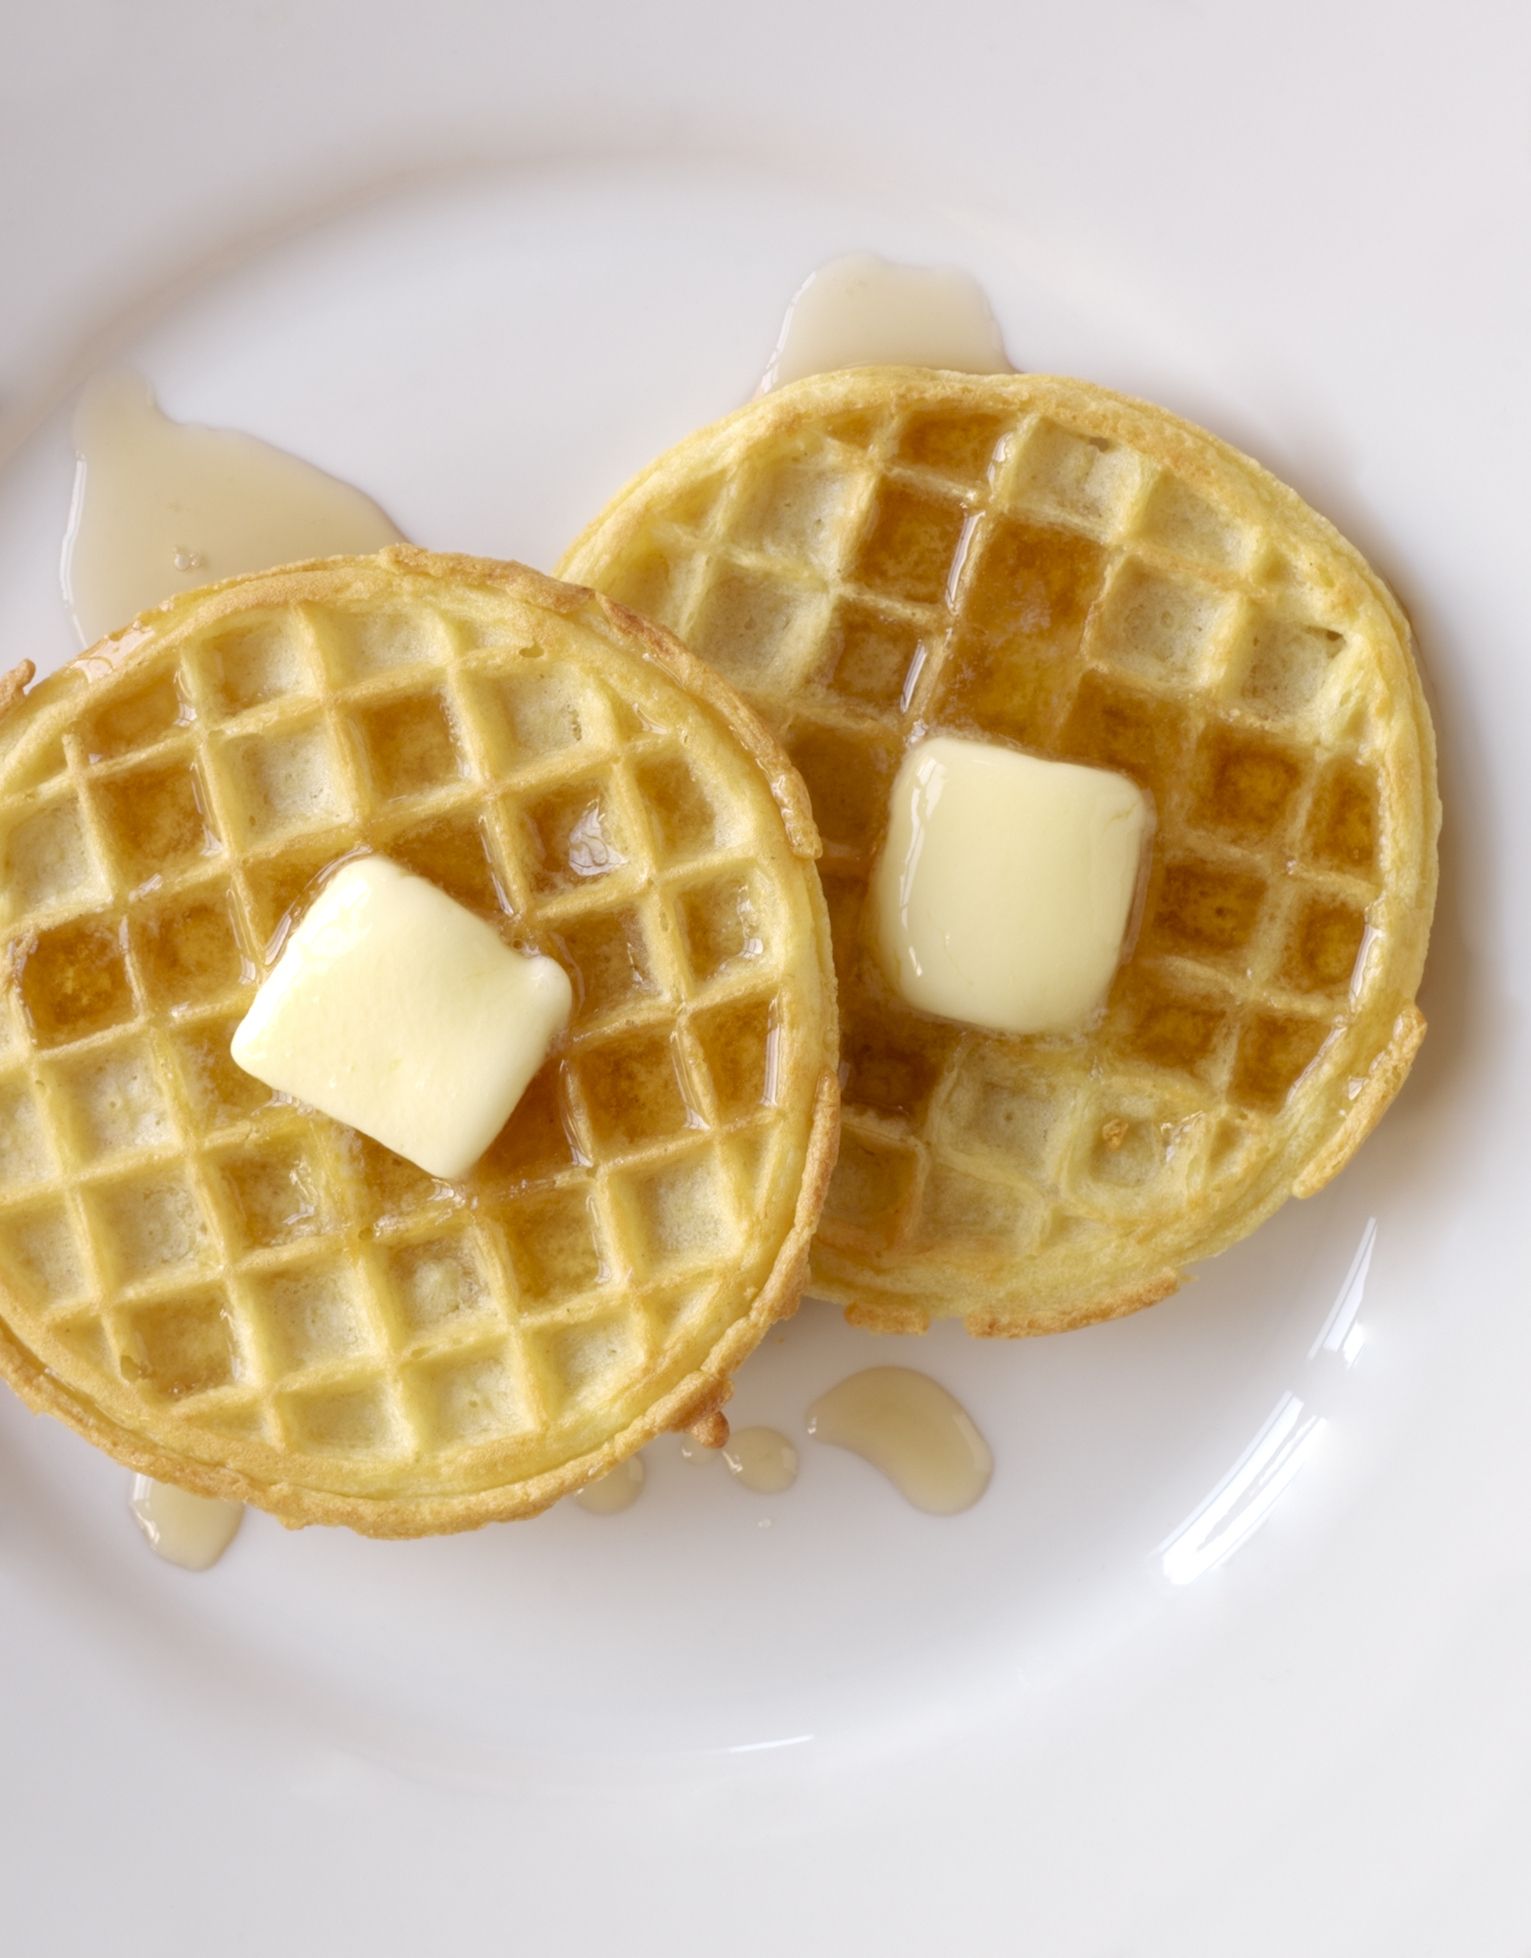 This Hack Makes Frozen Waffles Taste Homemade